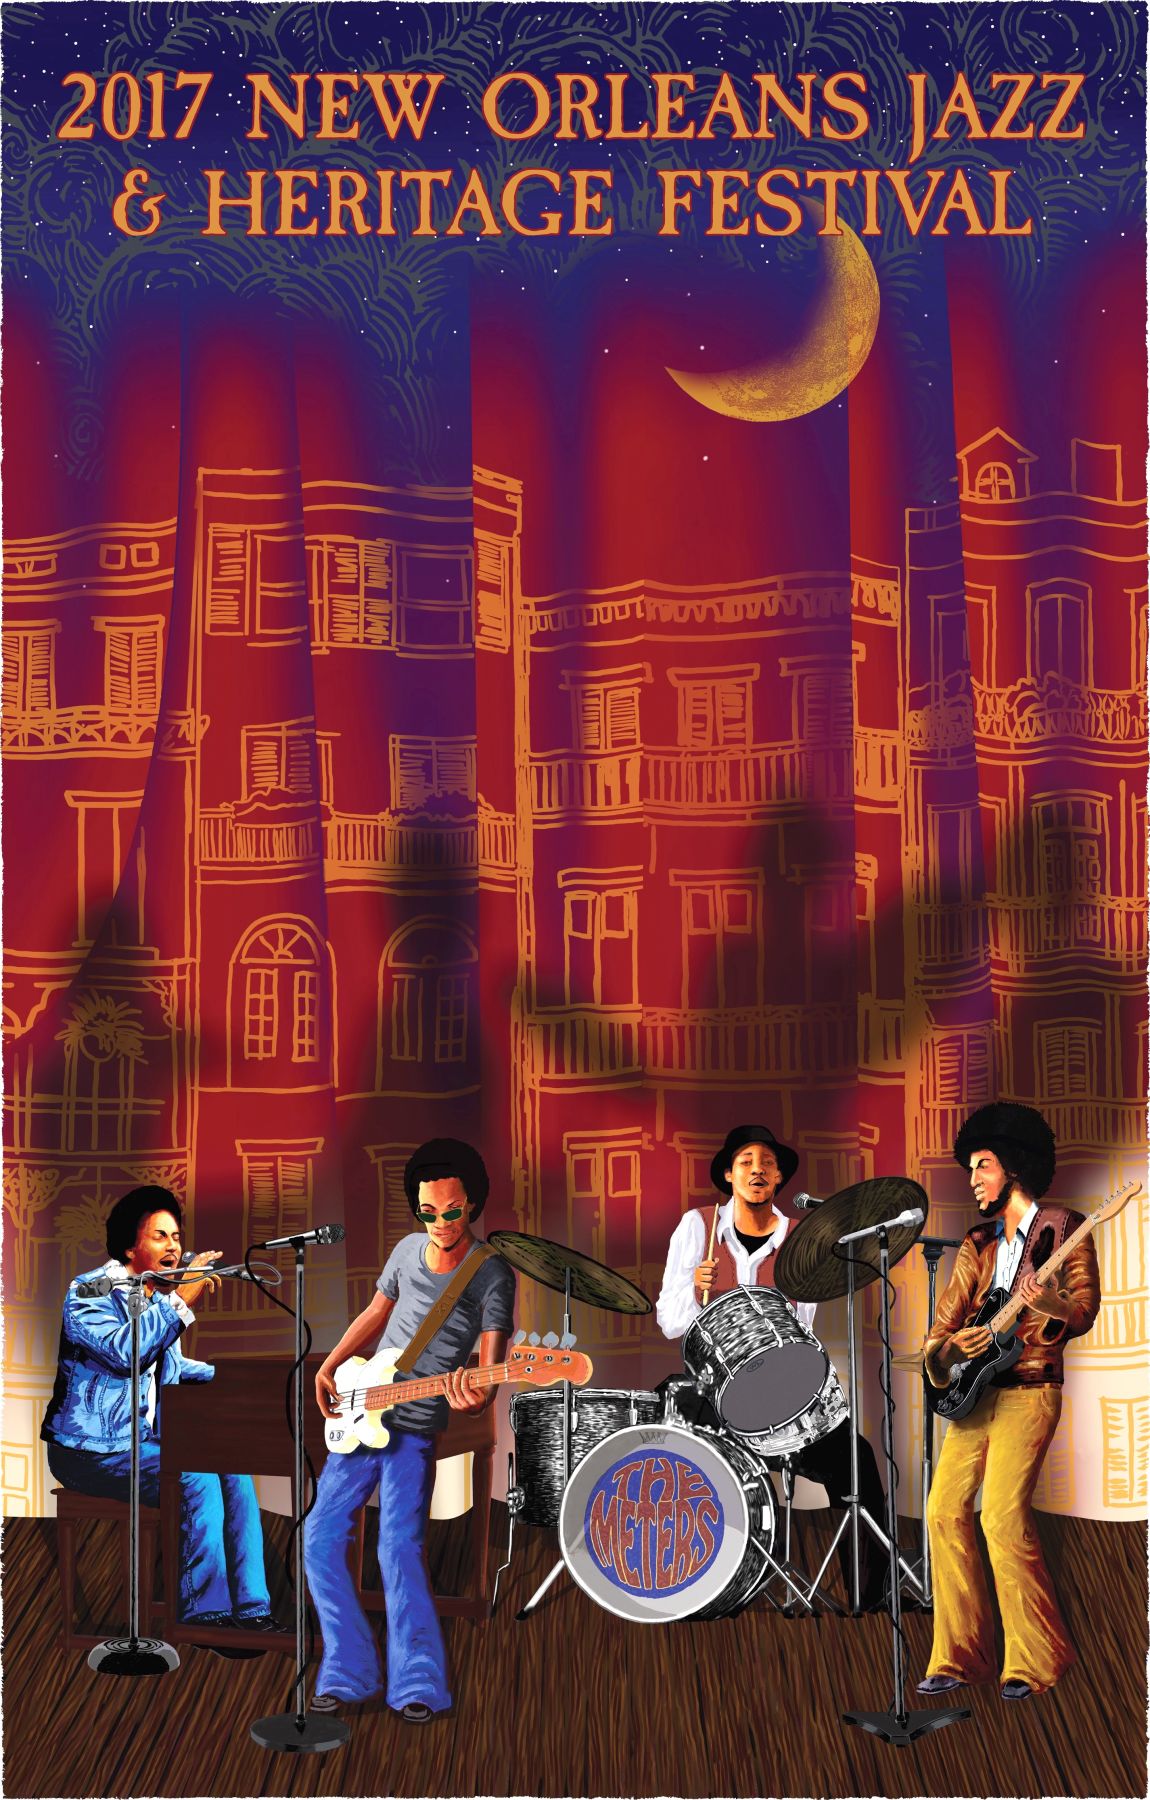 New Orleans Jazz Fest poster artist Francis X. Pavy captured the Meters